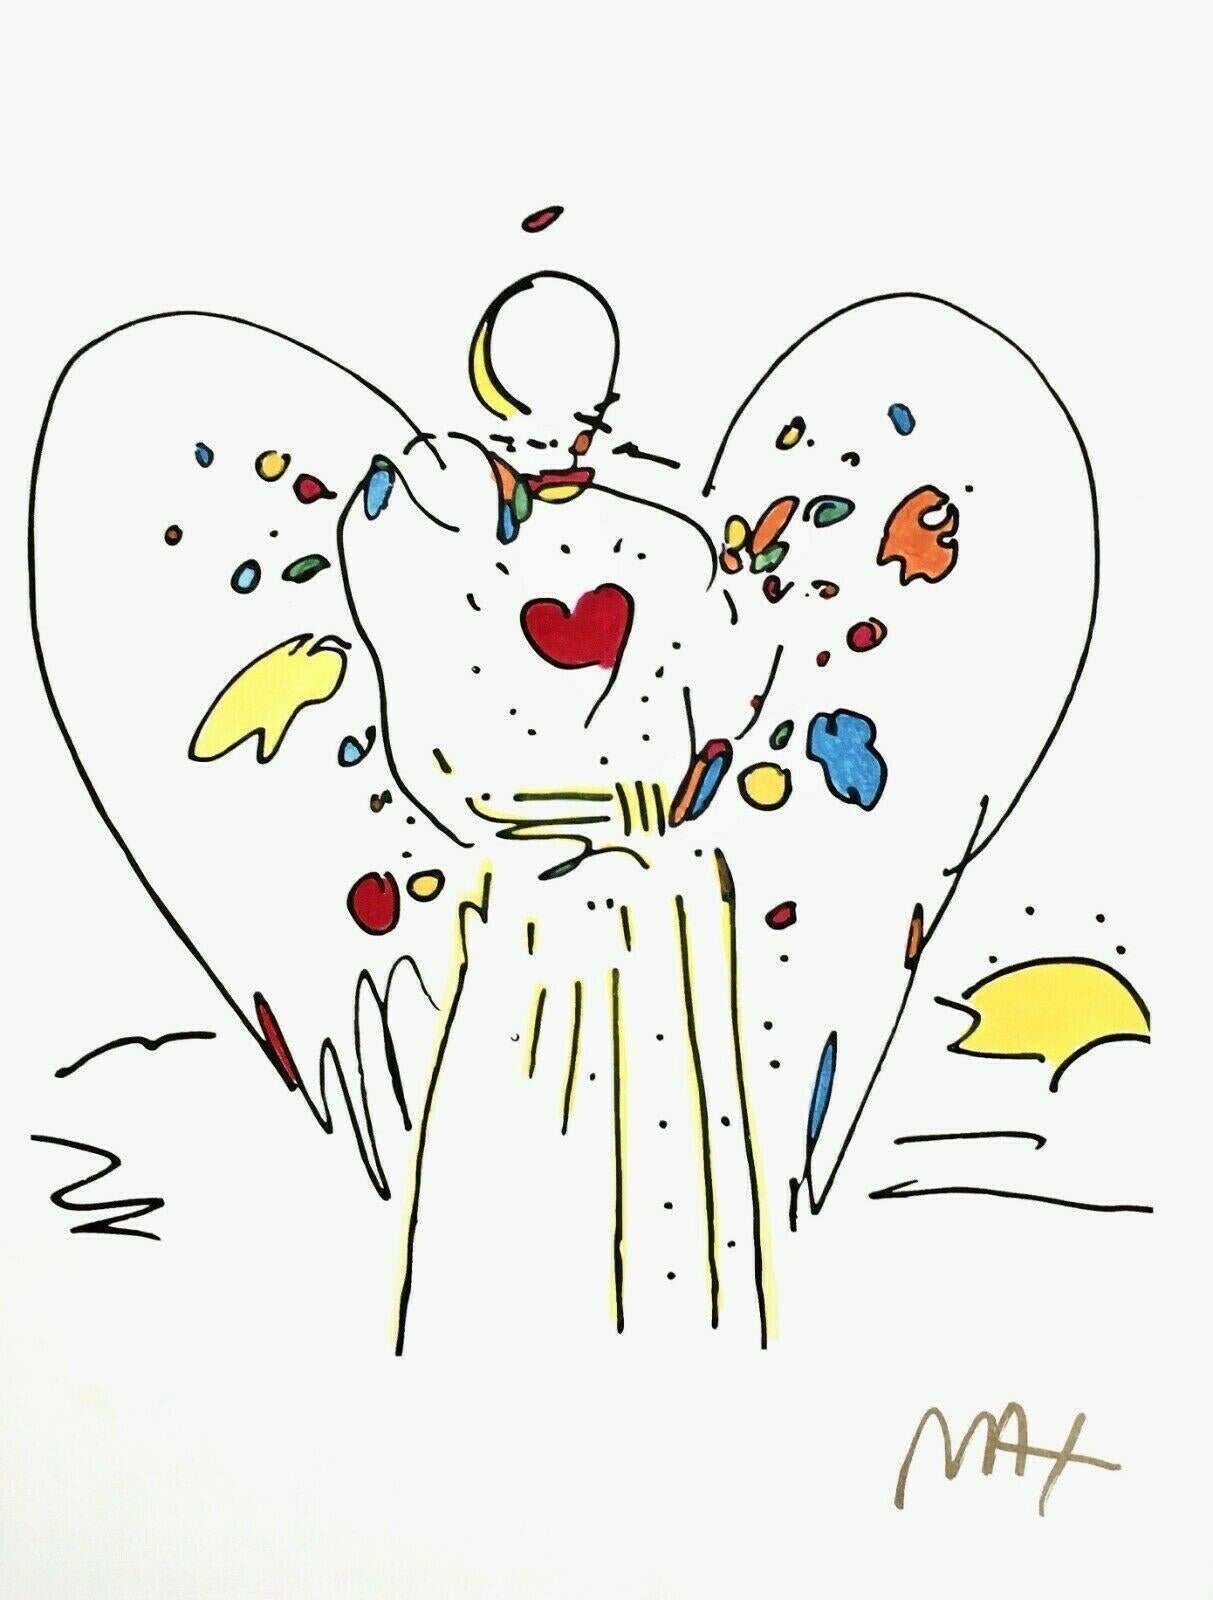 Angel with Heart, Peter Max